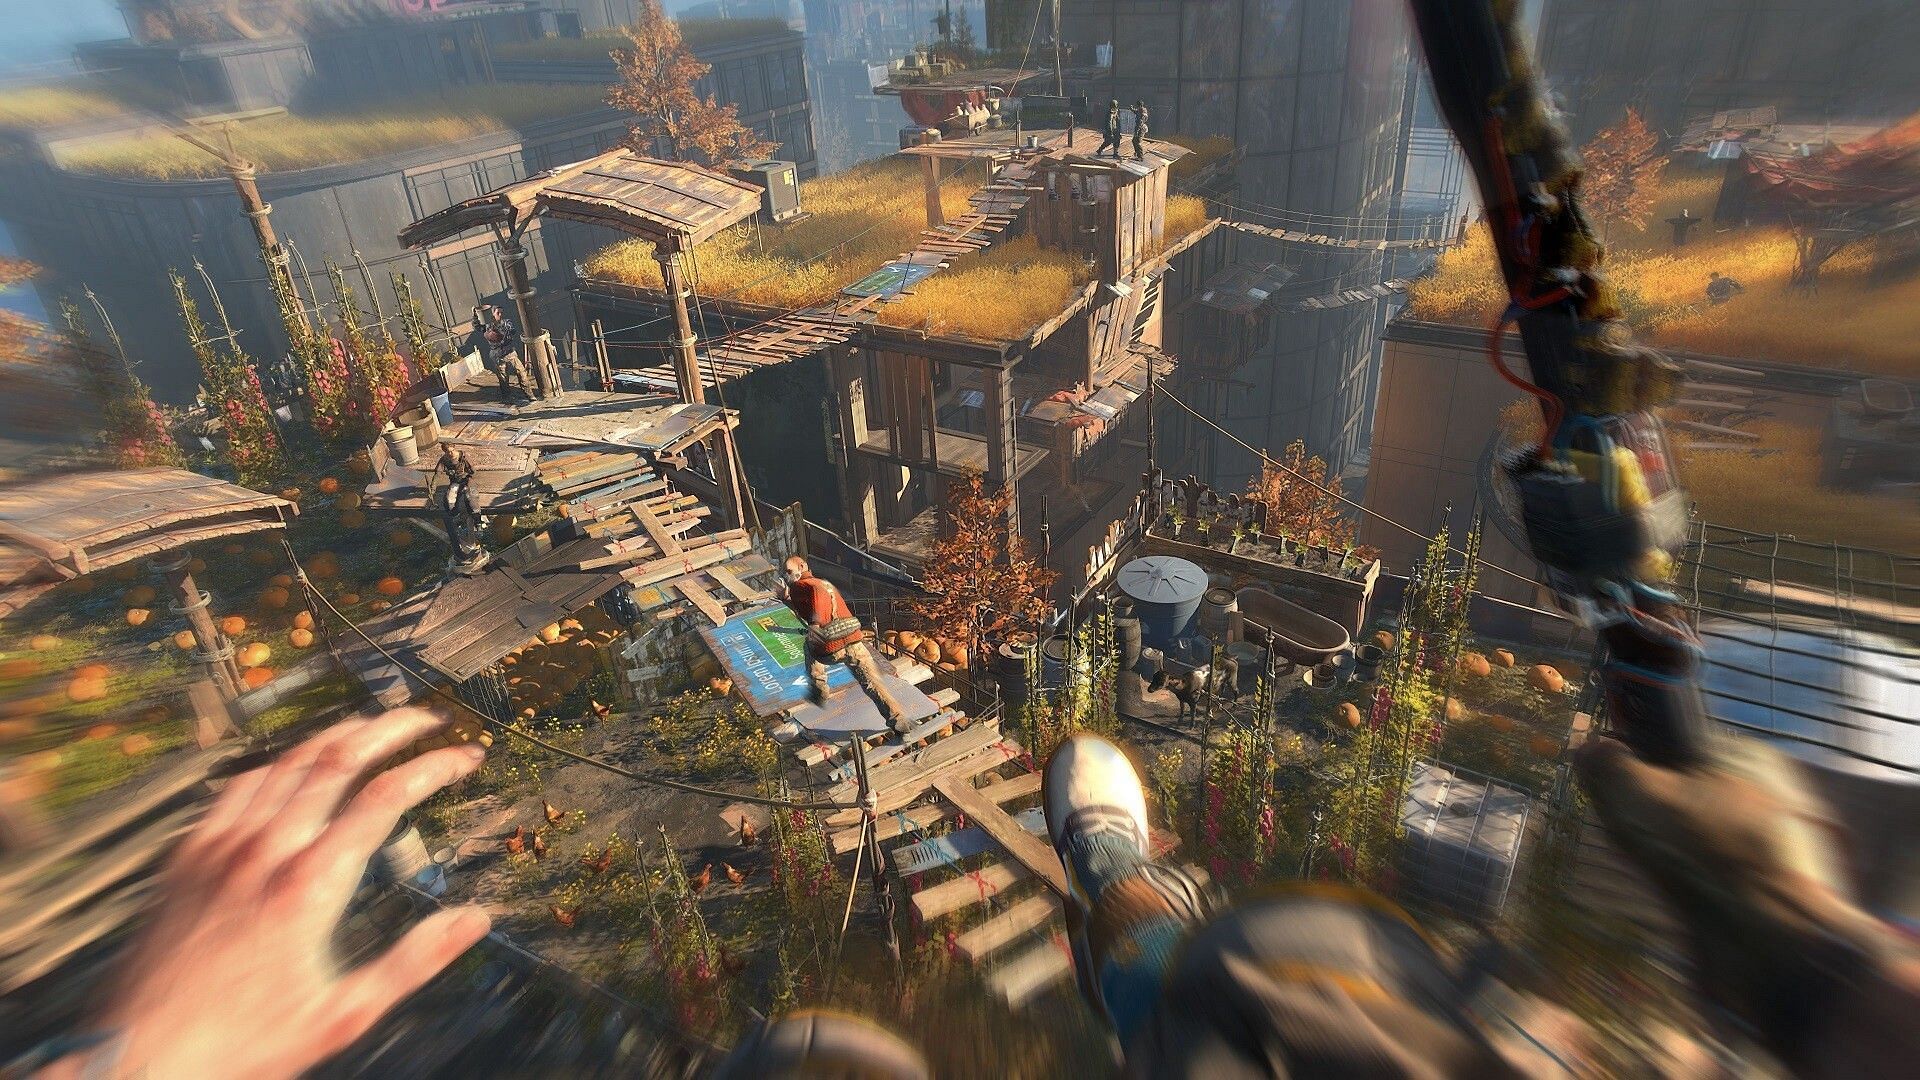 The latest Dying Light 2 update adds guns to the open-world survival horror zombie game (Image via Techland)